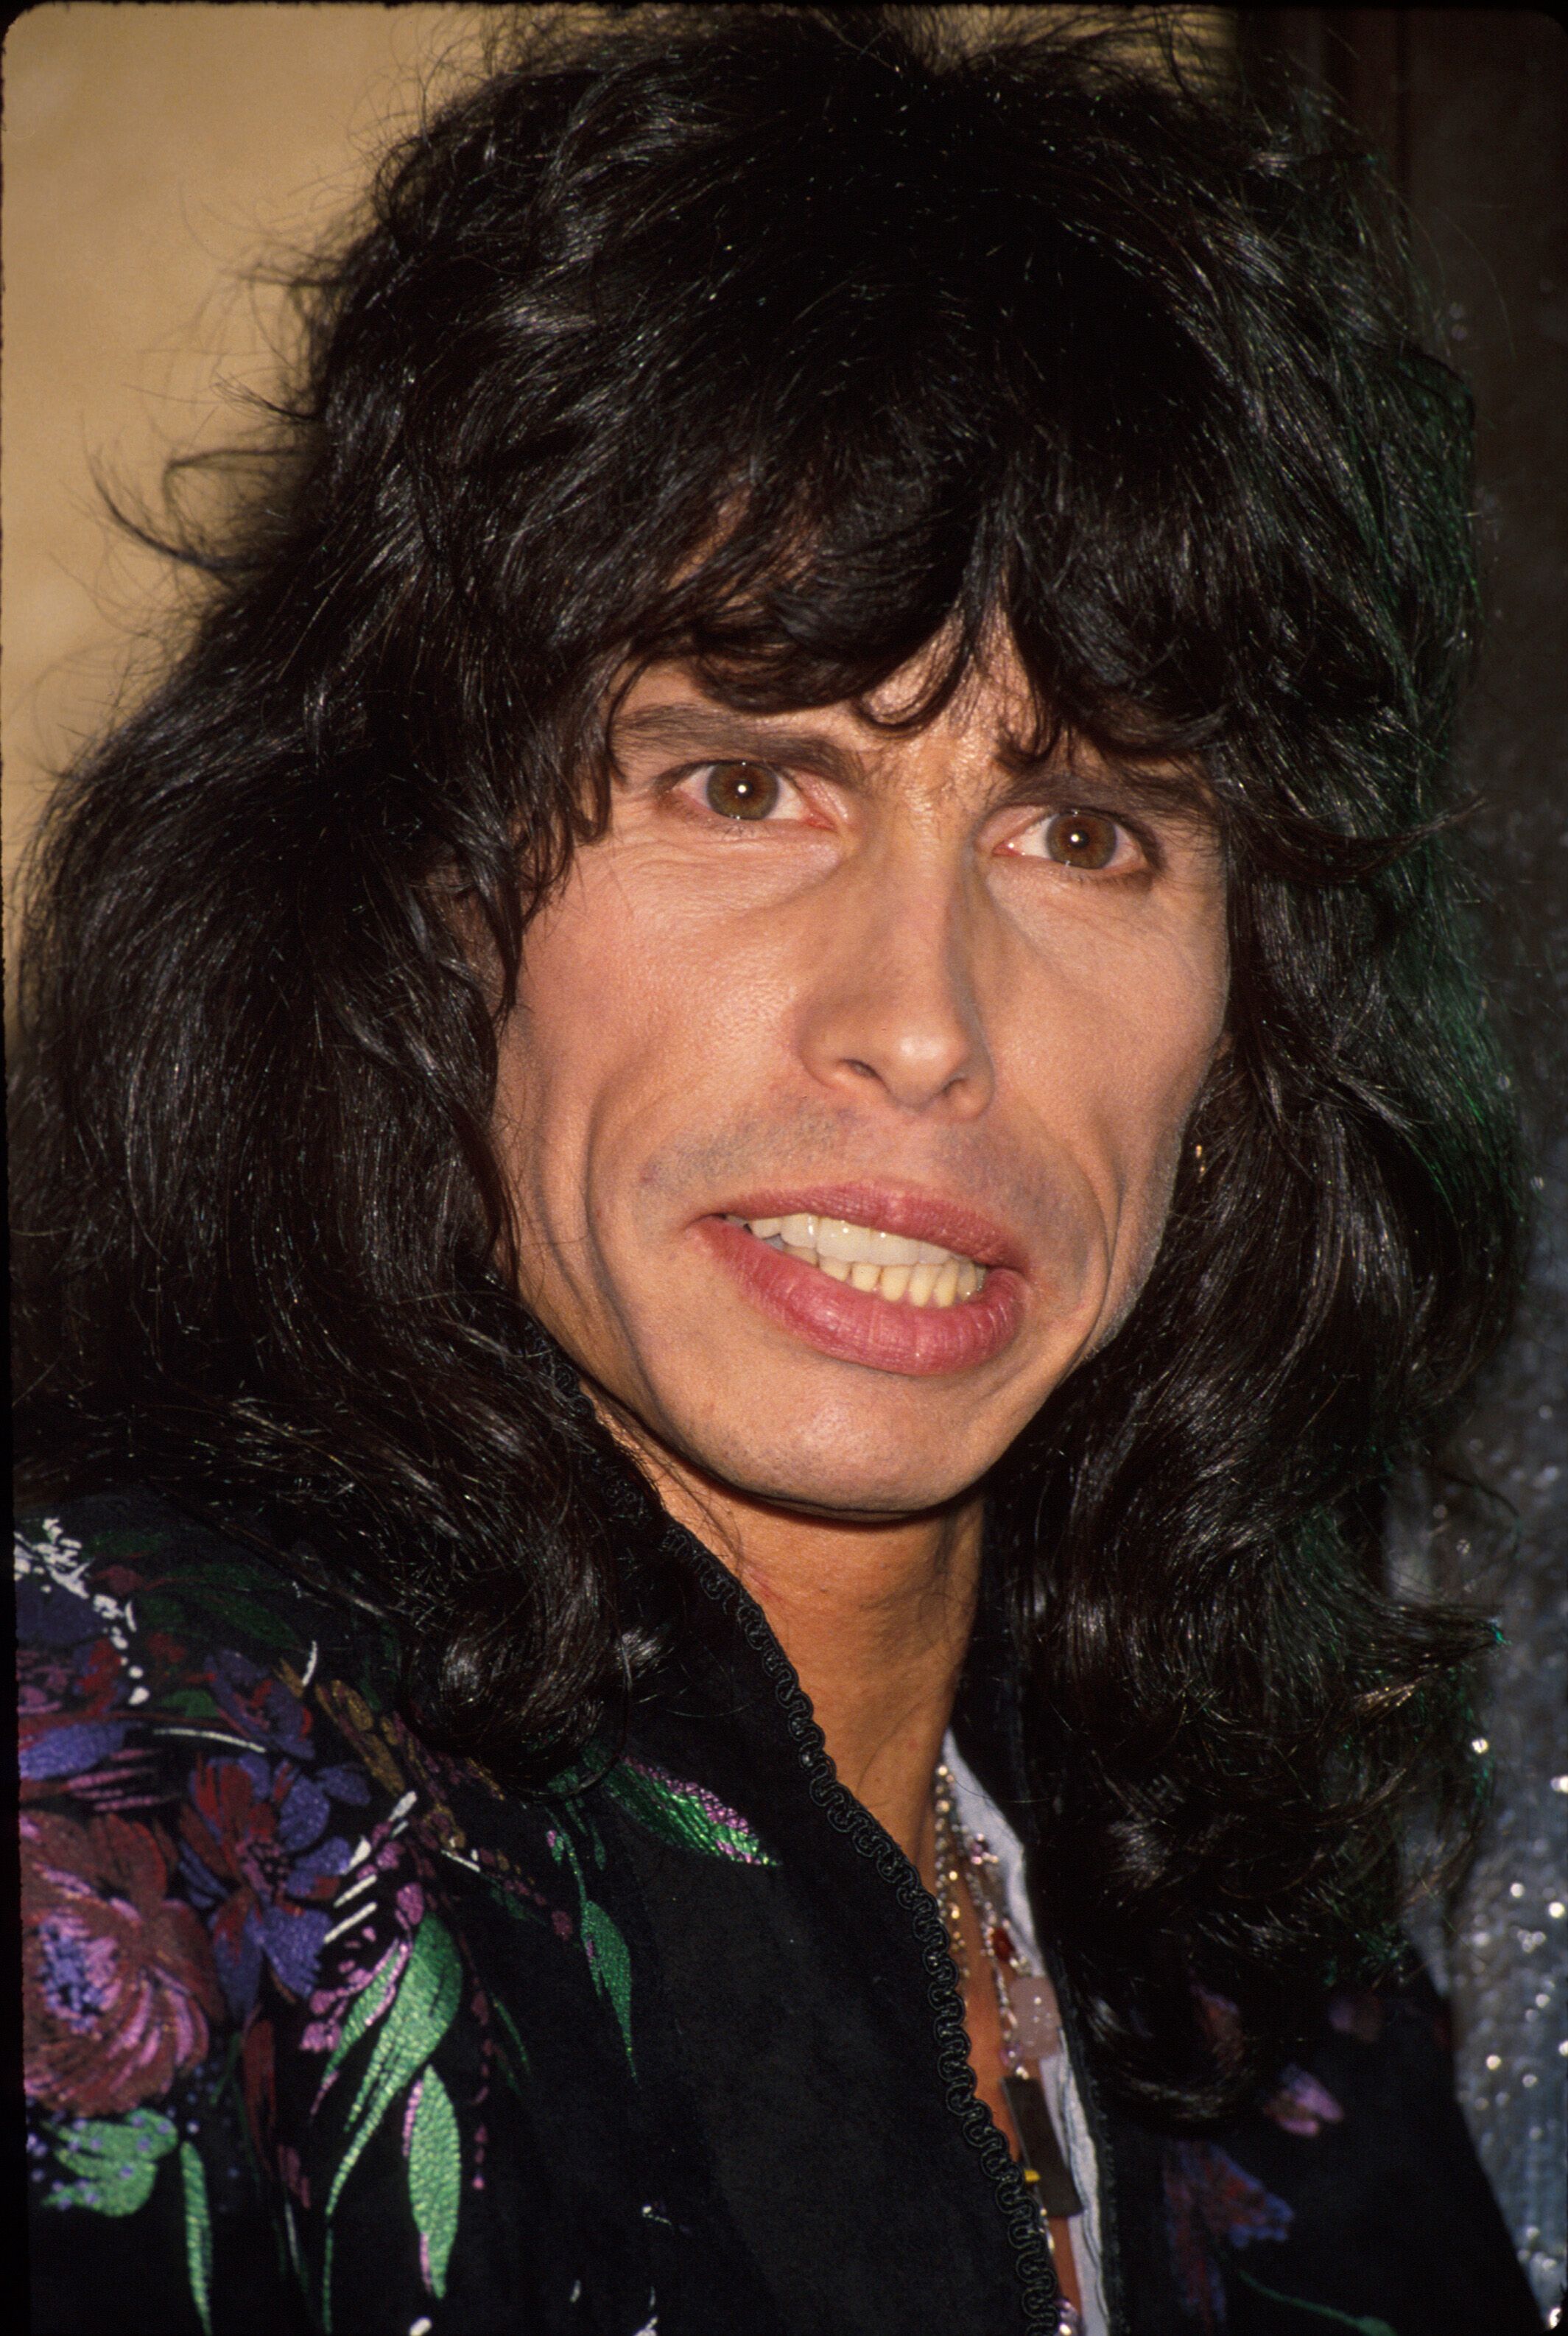 Steven Tyler smiles in a throwback photo from his youth. | Source: Getty Images